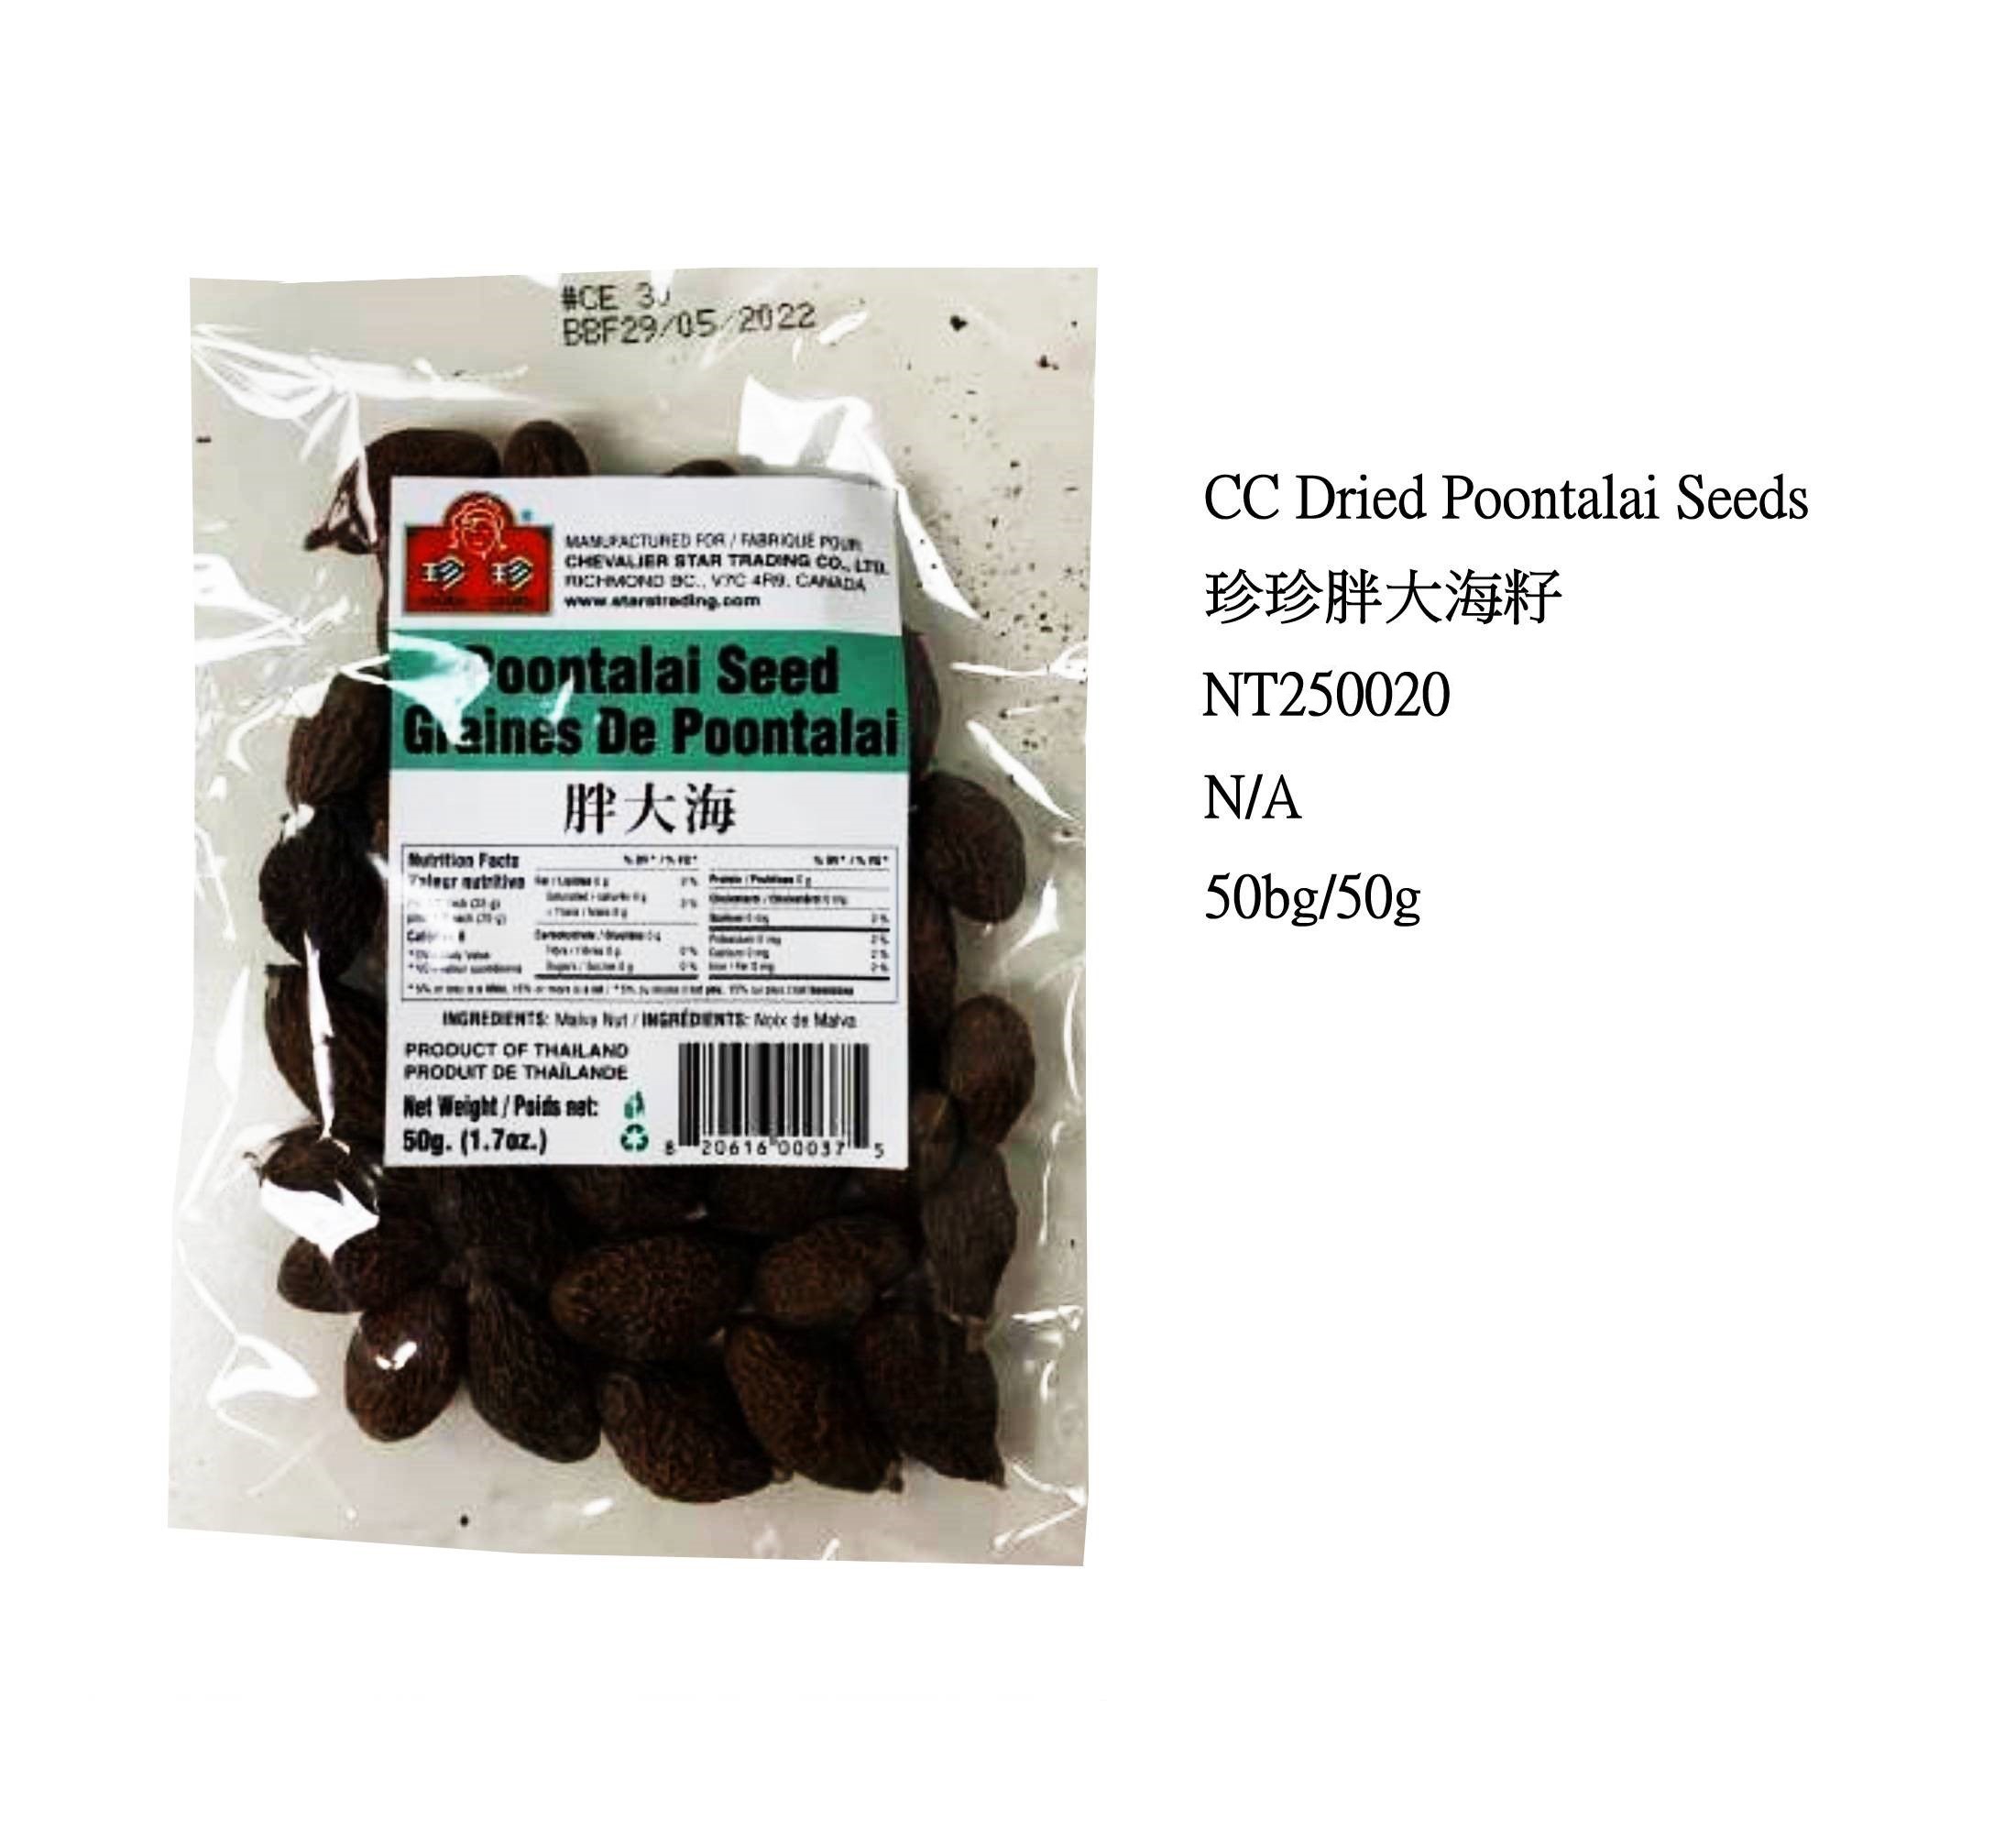 CHEN CHEN DRIED POONTALAI SEEDS NT250020